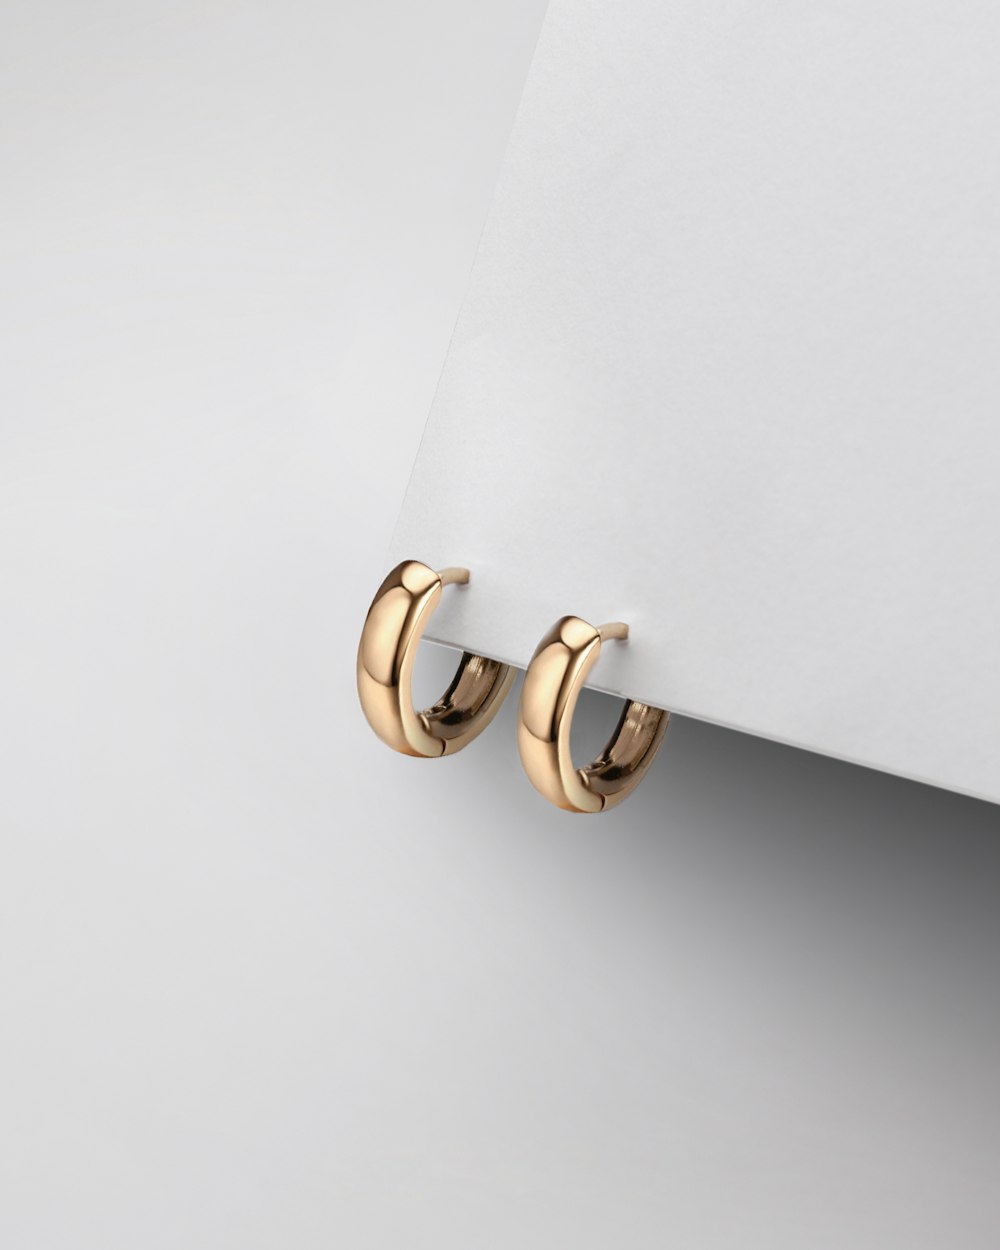 a pair of gold earrings on a white surface